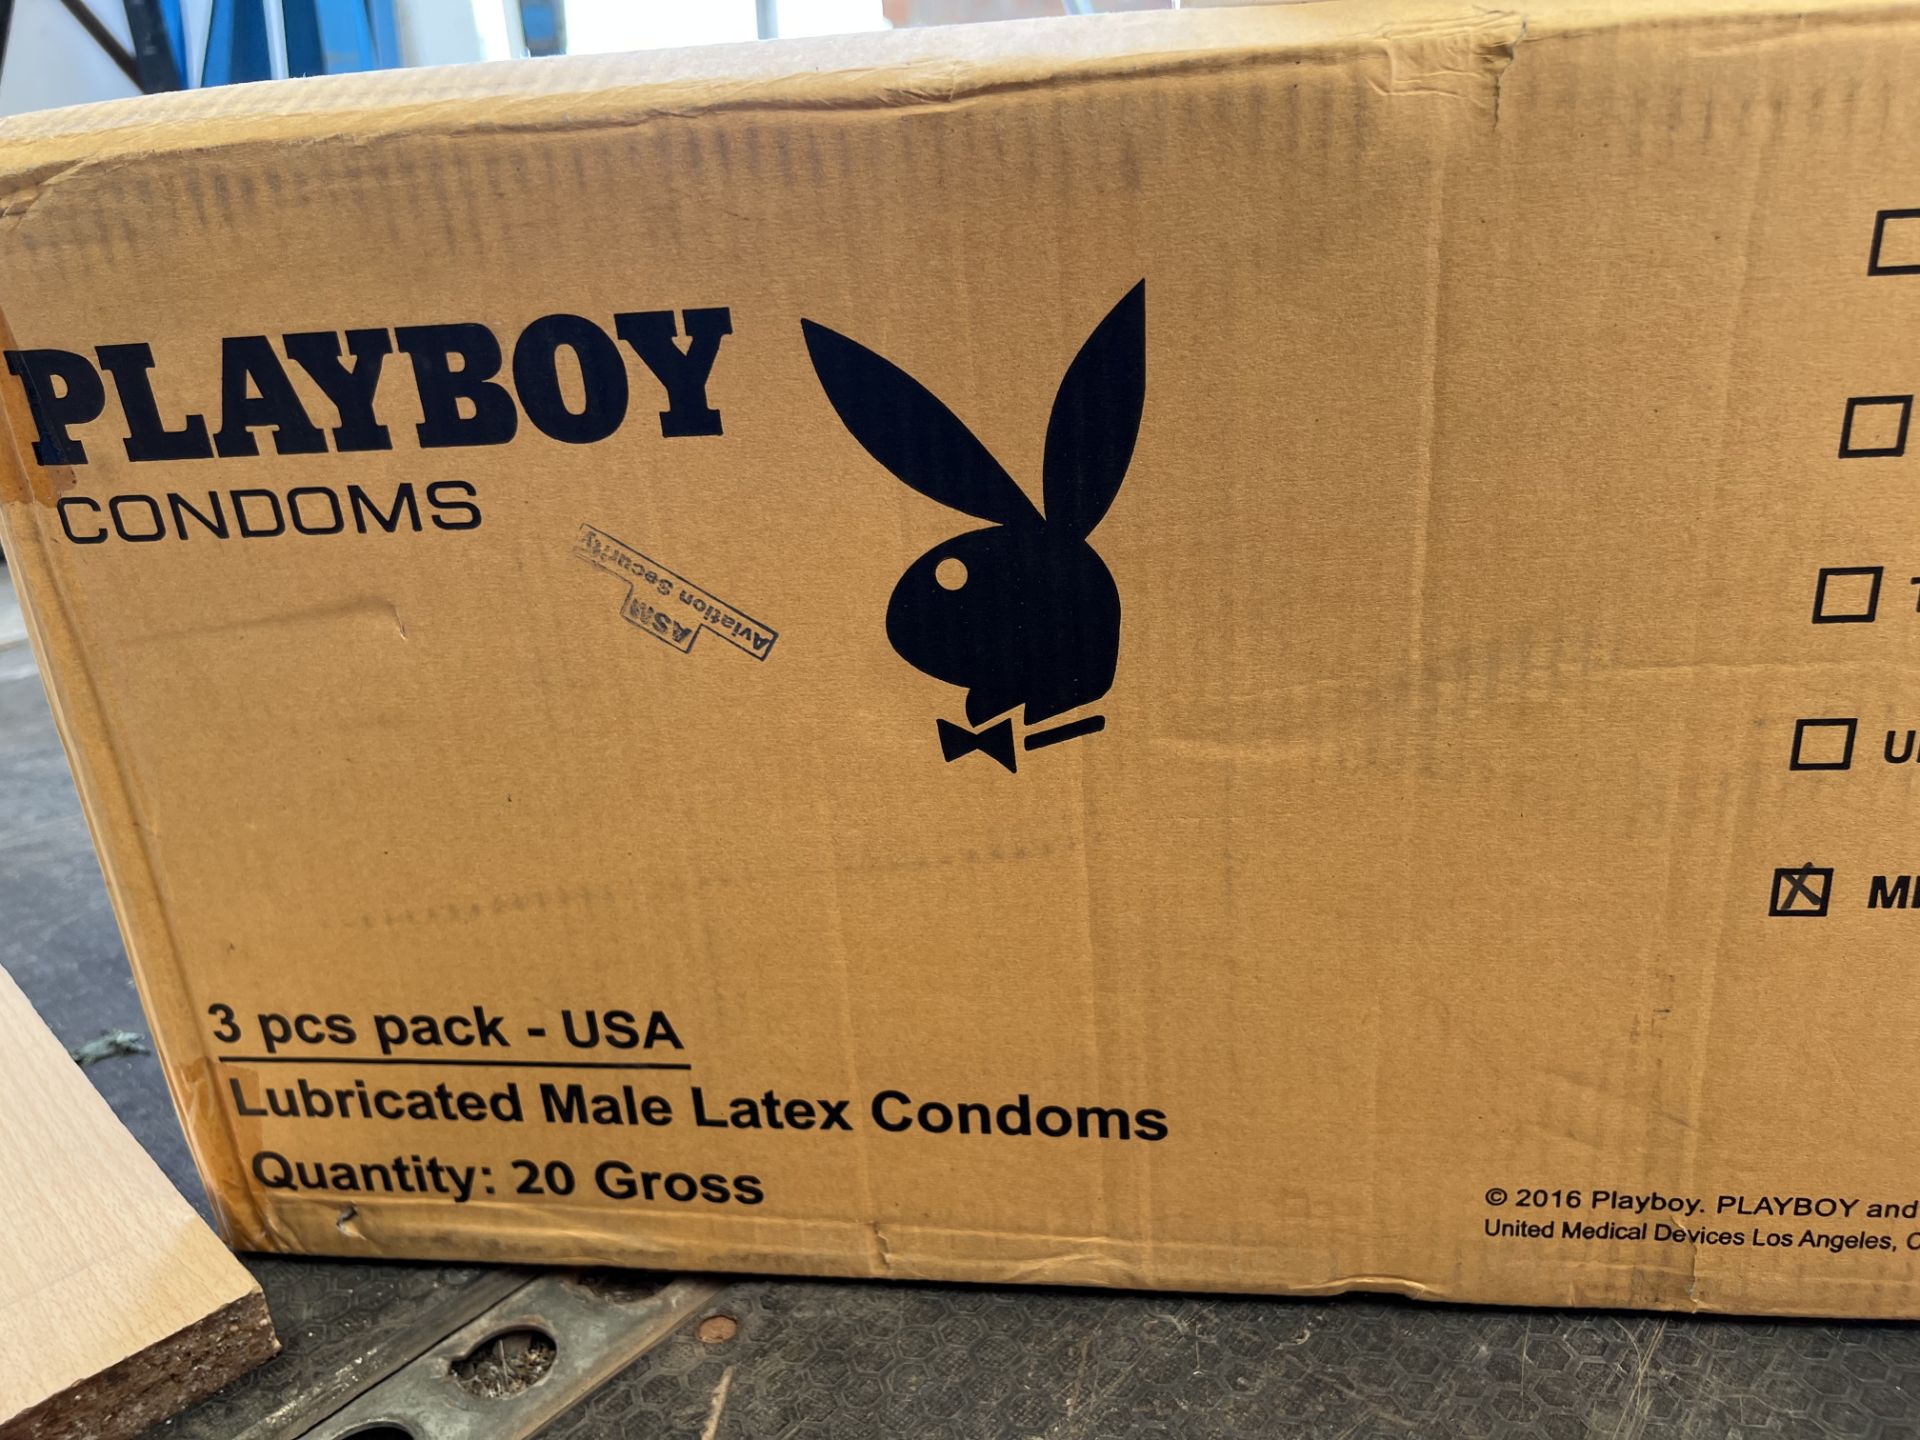 40 boxes with 24 packs with 3 pcs of PLAYBOY CONDOMS, LUBRICATED MALE LATEX CONDOMS, MIXED SIZE - Image 2 of 3